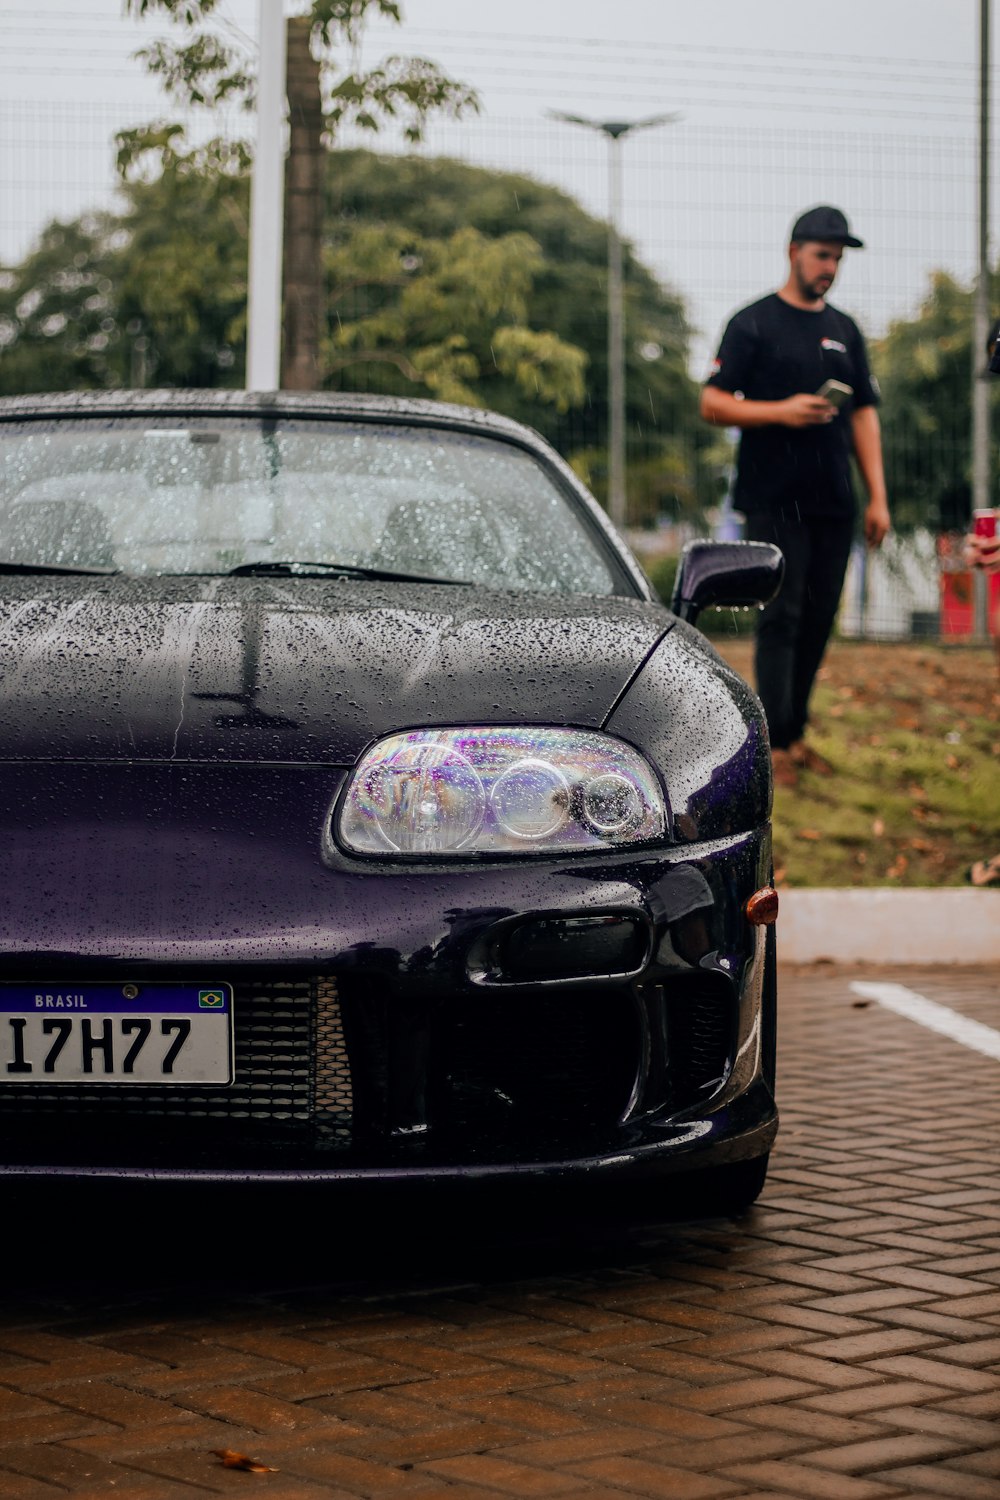 a purple sports car parked in a parking lot